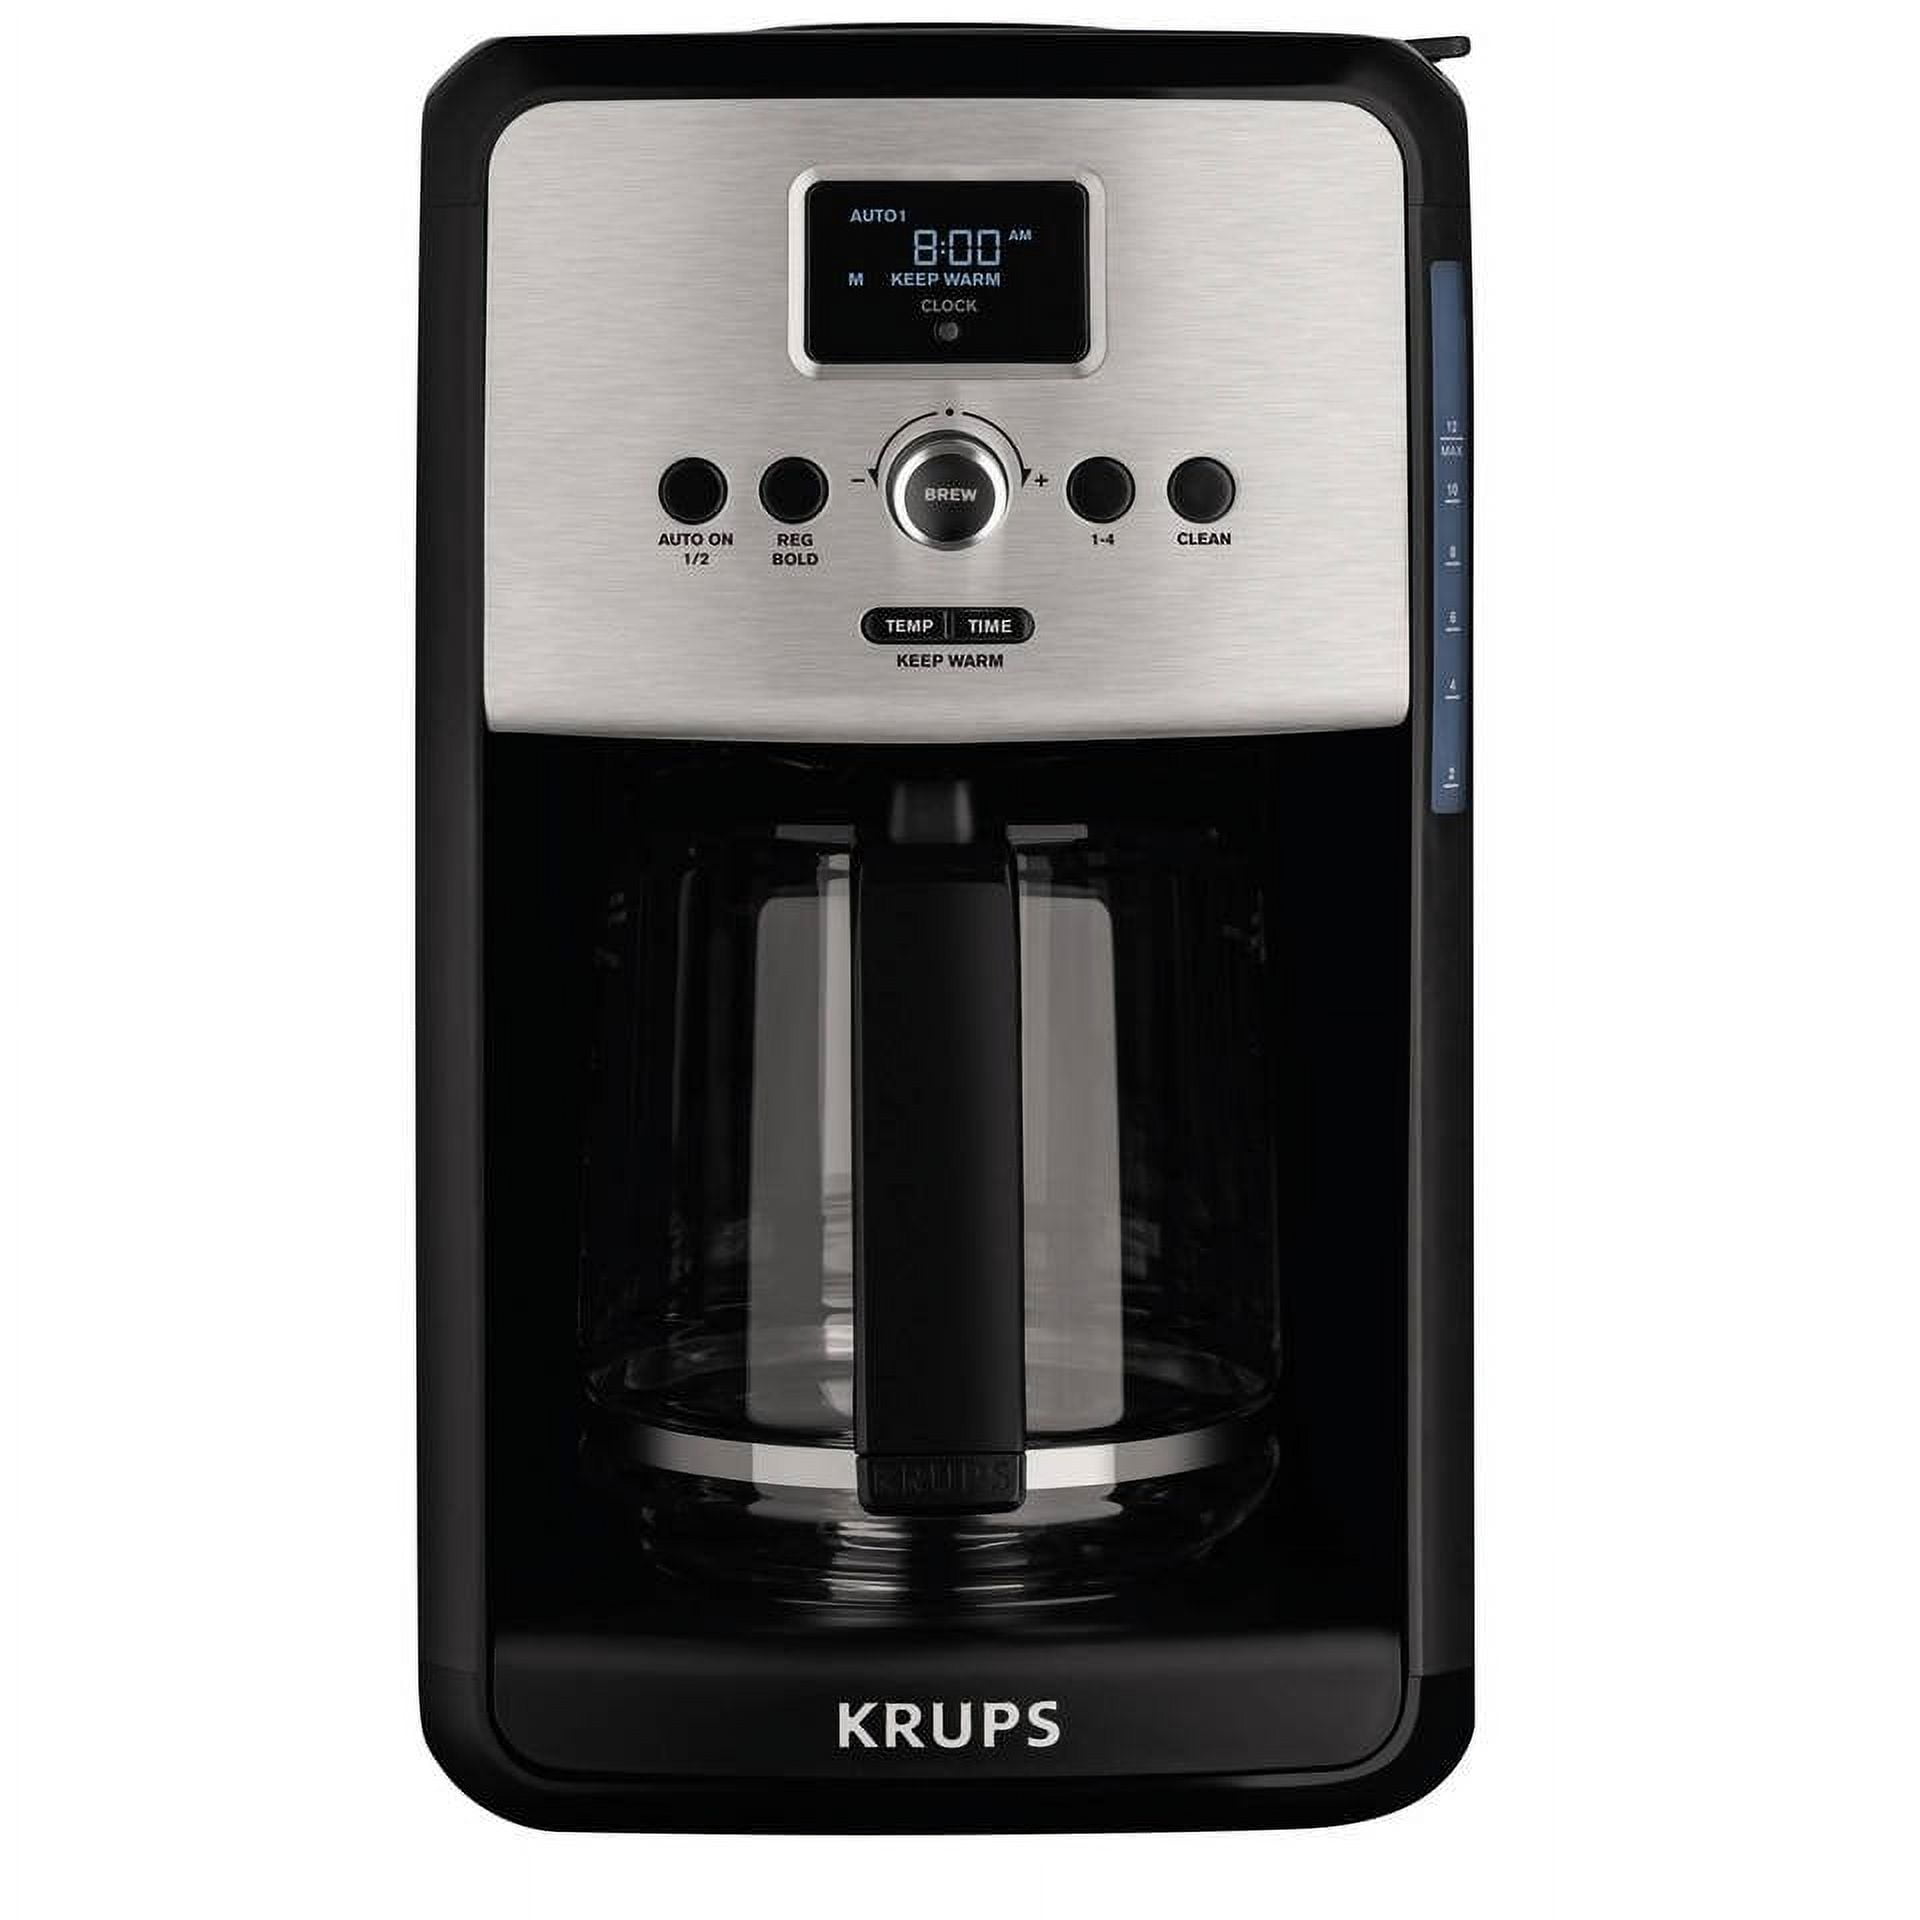 Krups Cafe Express 4-Cup Coffee Maker w/ PermanentFilter 